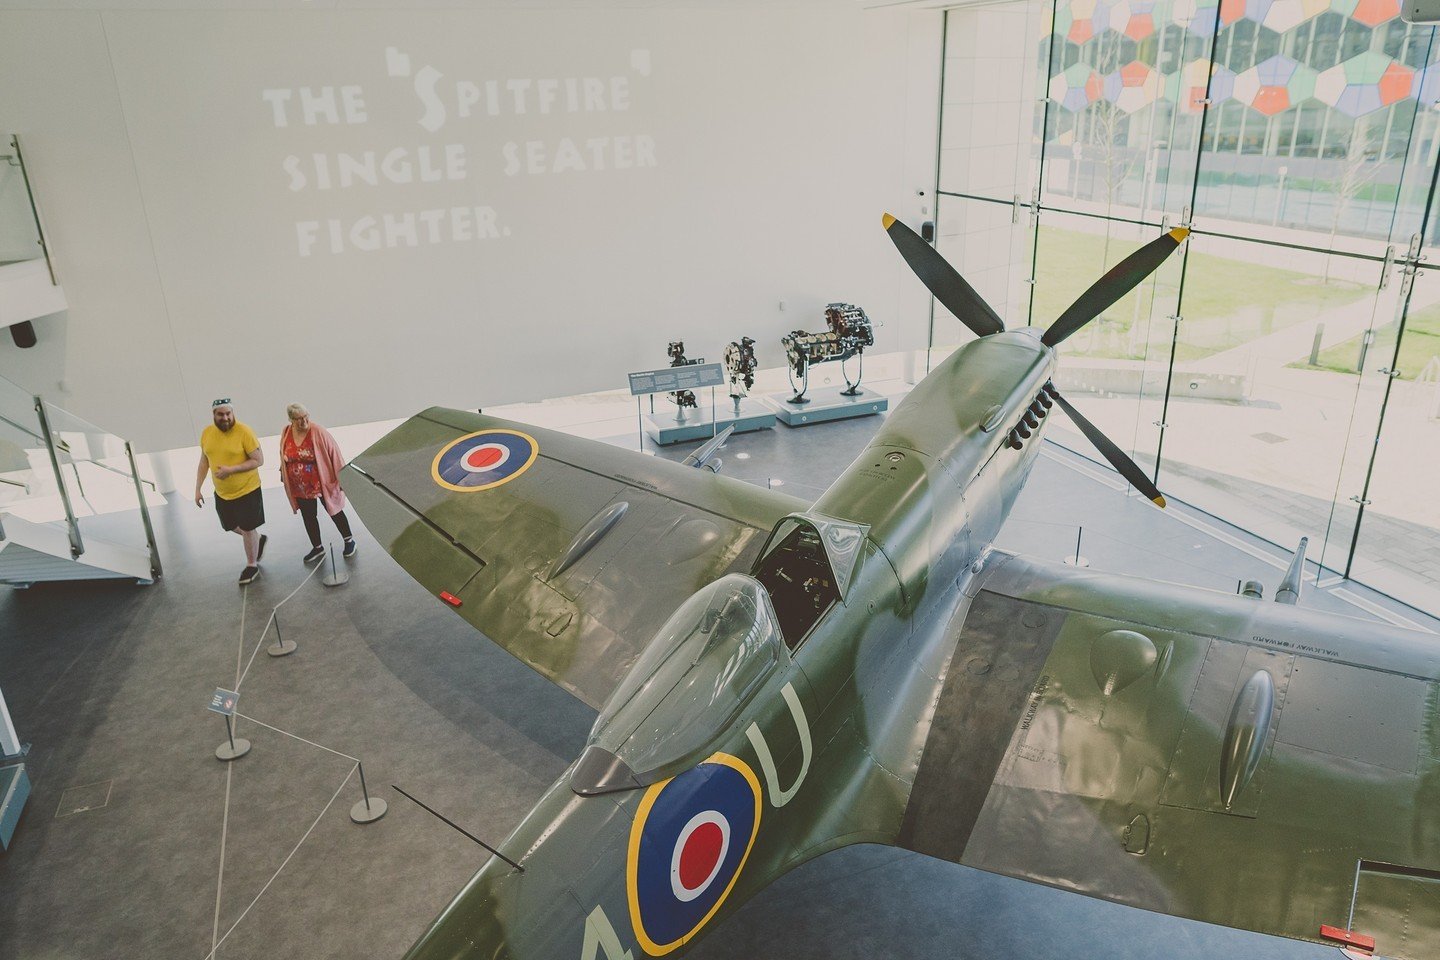 As part of our work with @stokeontrentbid, we photographed the brilliant Spitfire exhibit at @potteriesmuseum.⁠
⁠
#smallbizlife #smallbiztips #smallbizowner #smallbizlove #meetthemaker #indieroller #independentbusiness #shopsmall #supportsmall #indie